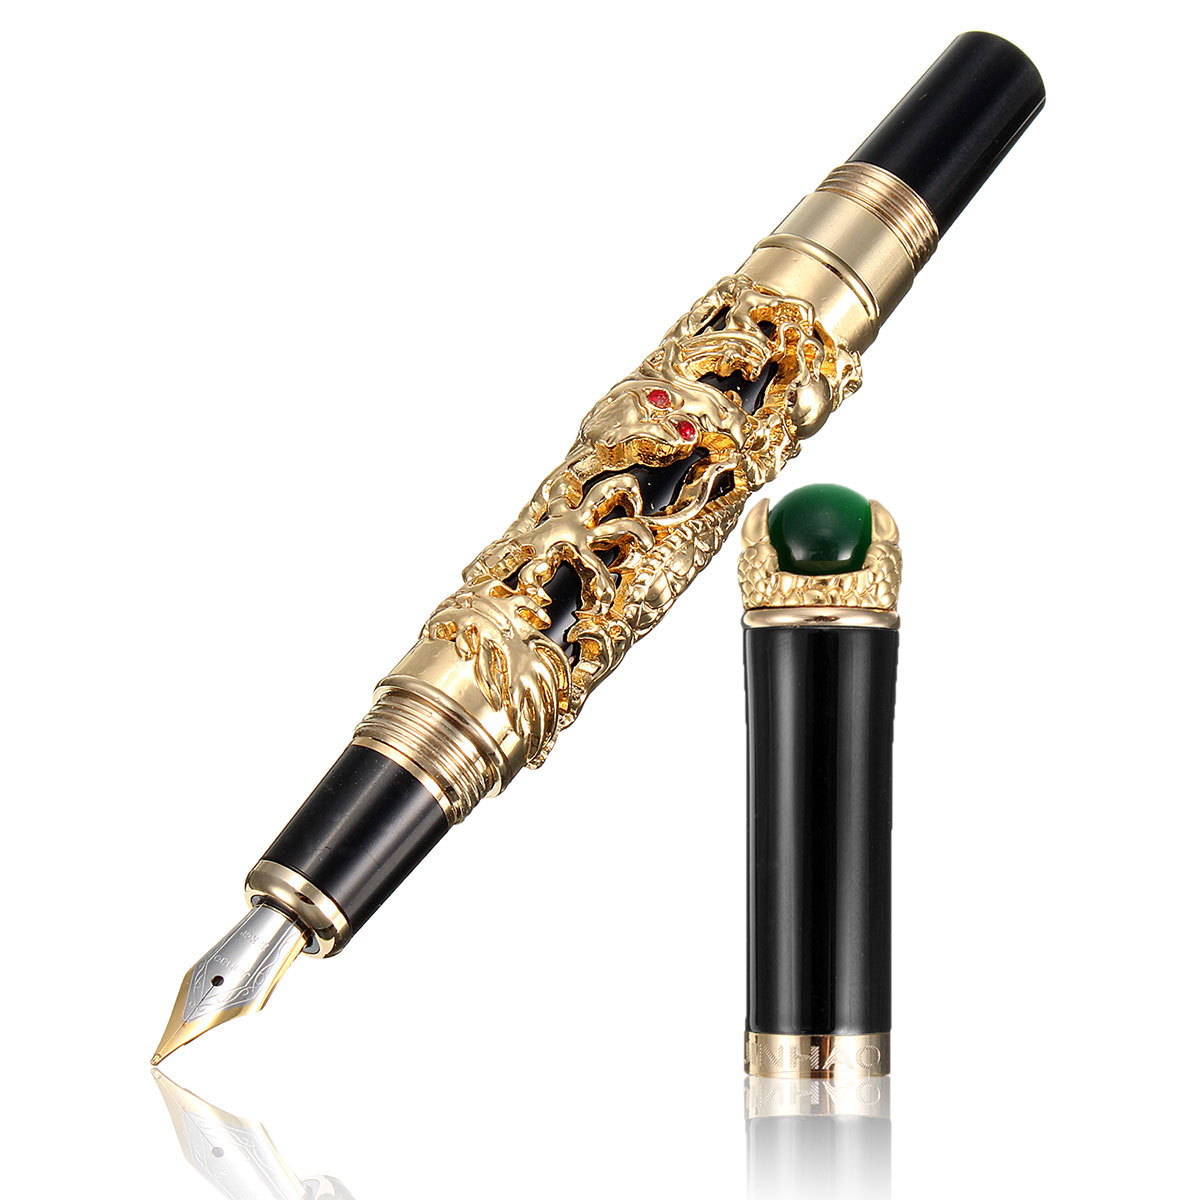 New Plating Gradient China Fountain Pen Extra Fine 0.5/0.38mm Nibs Writing Gifts 